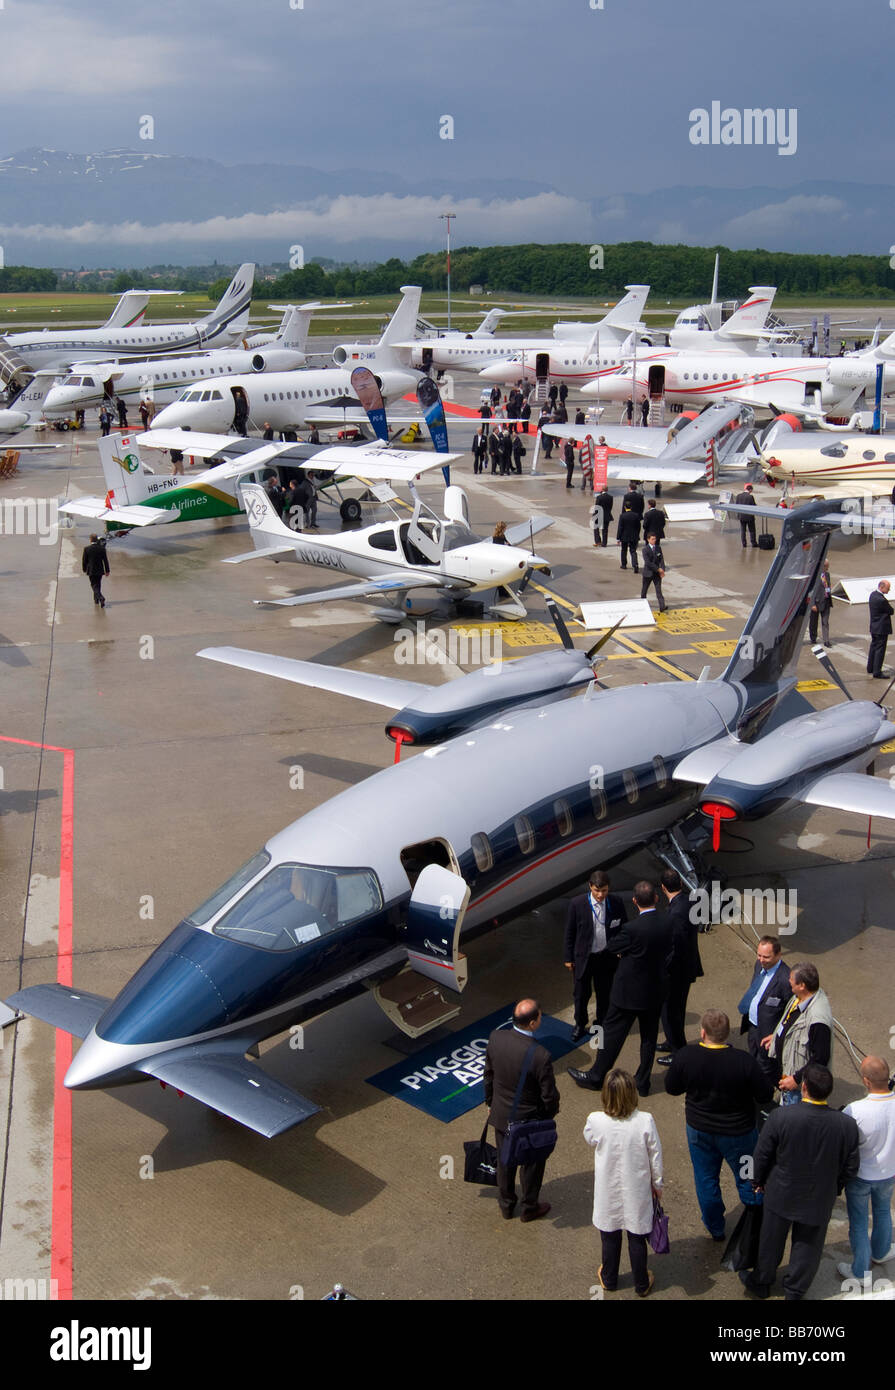 Piaggio P180 Avanti Business Aeroplane and Other Aircraft at Ebace Trade Show Geneva Airport Switzerland Geneve Suisse Stock Photo